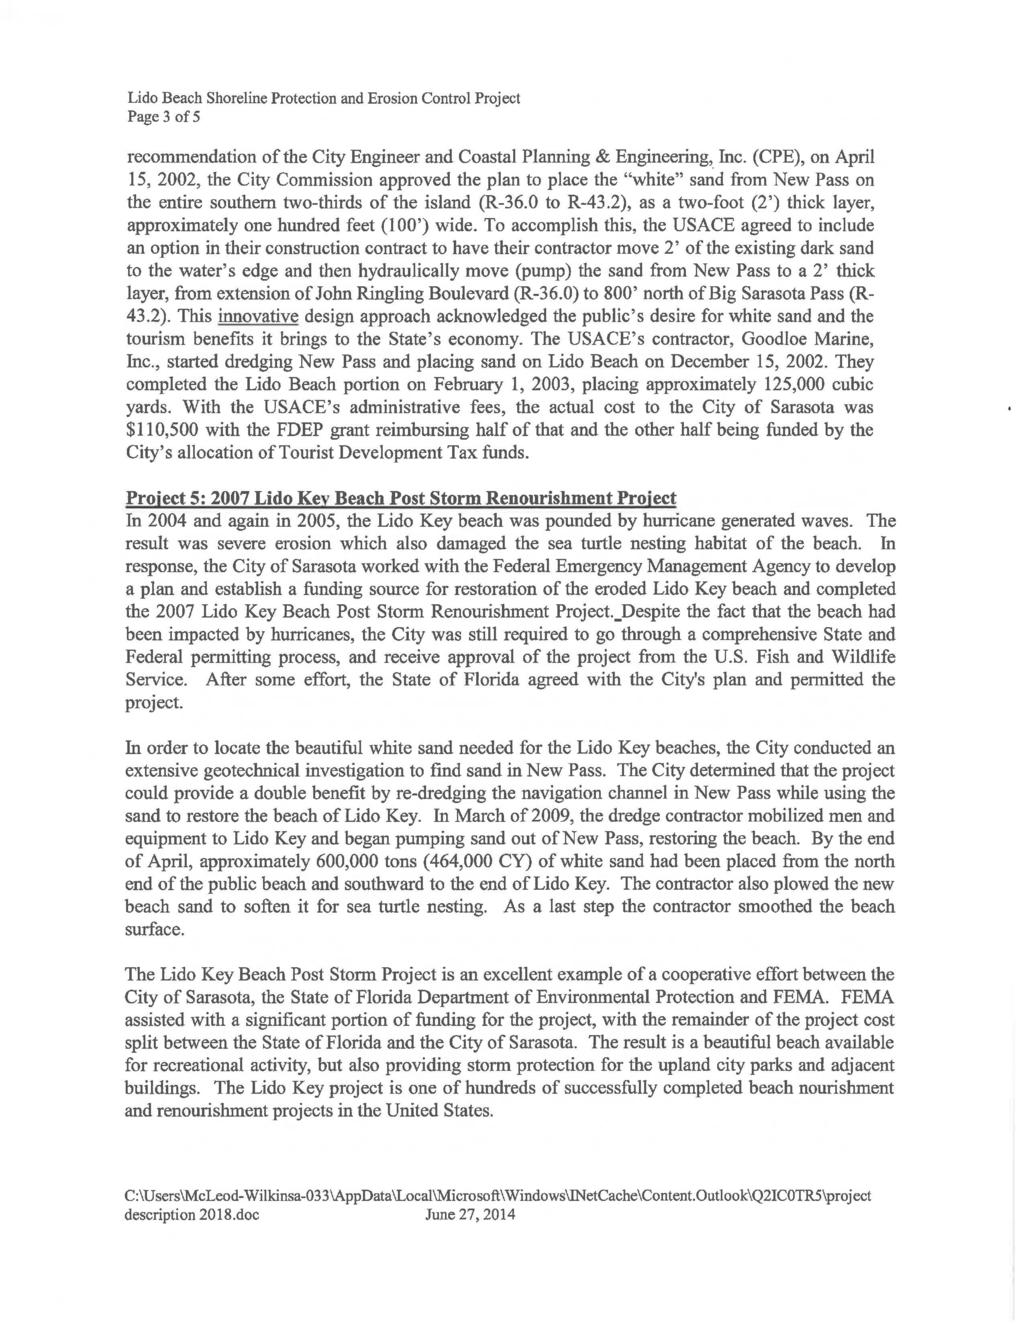 Lido Beach Shoreline Protection and Erosion Control Project Page 3 ofs recommendation of the City Engineer and Coastal Planning & Engineering,_ Inc.